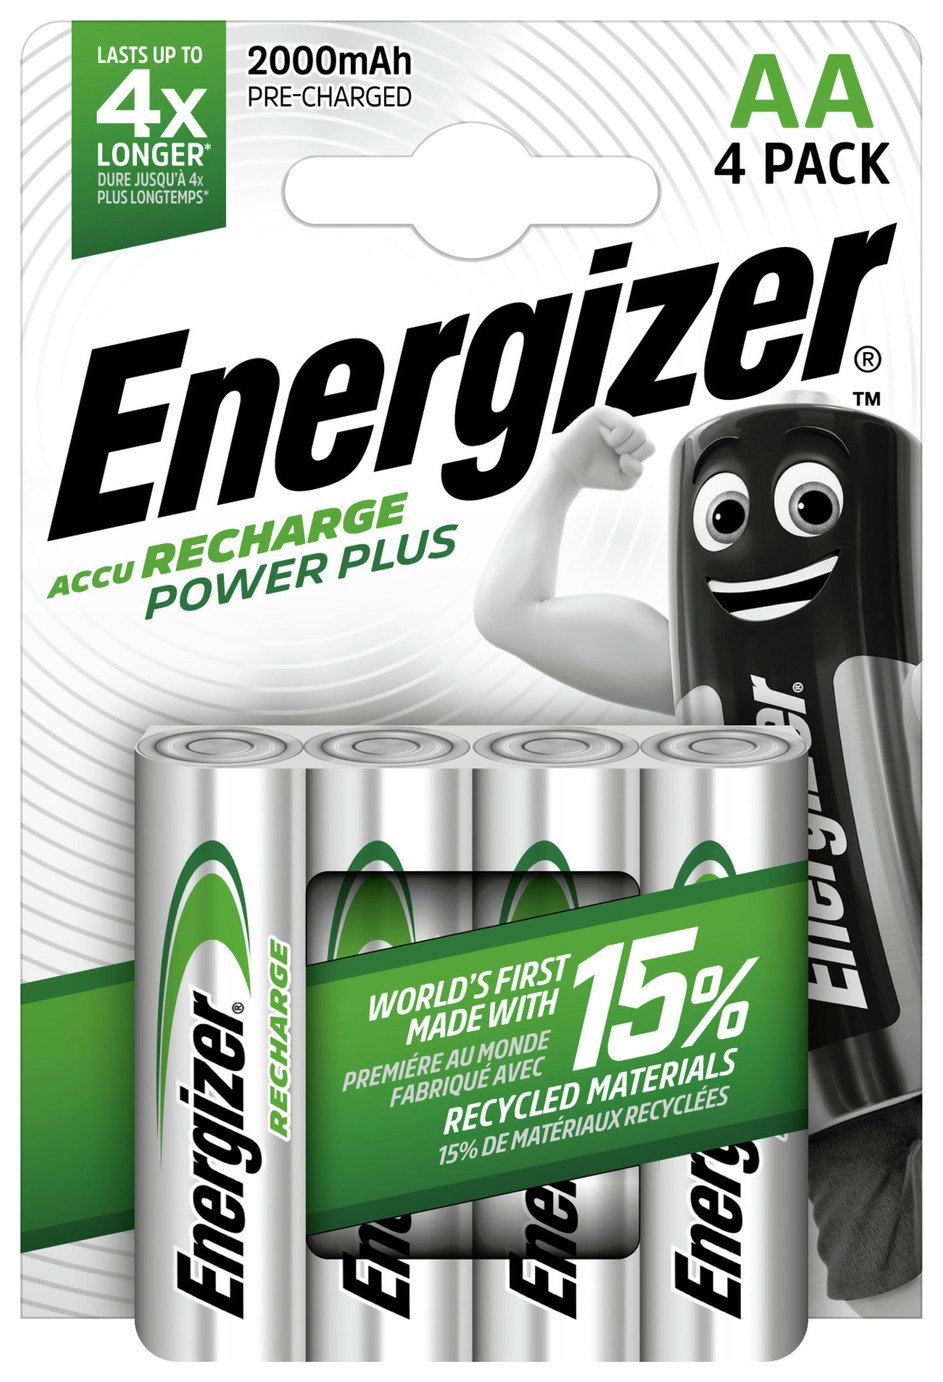 Energizer Rechargeable Power Plus AA Batteries Review